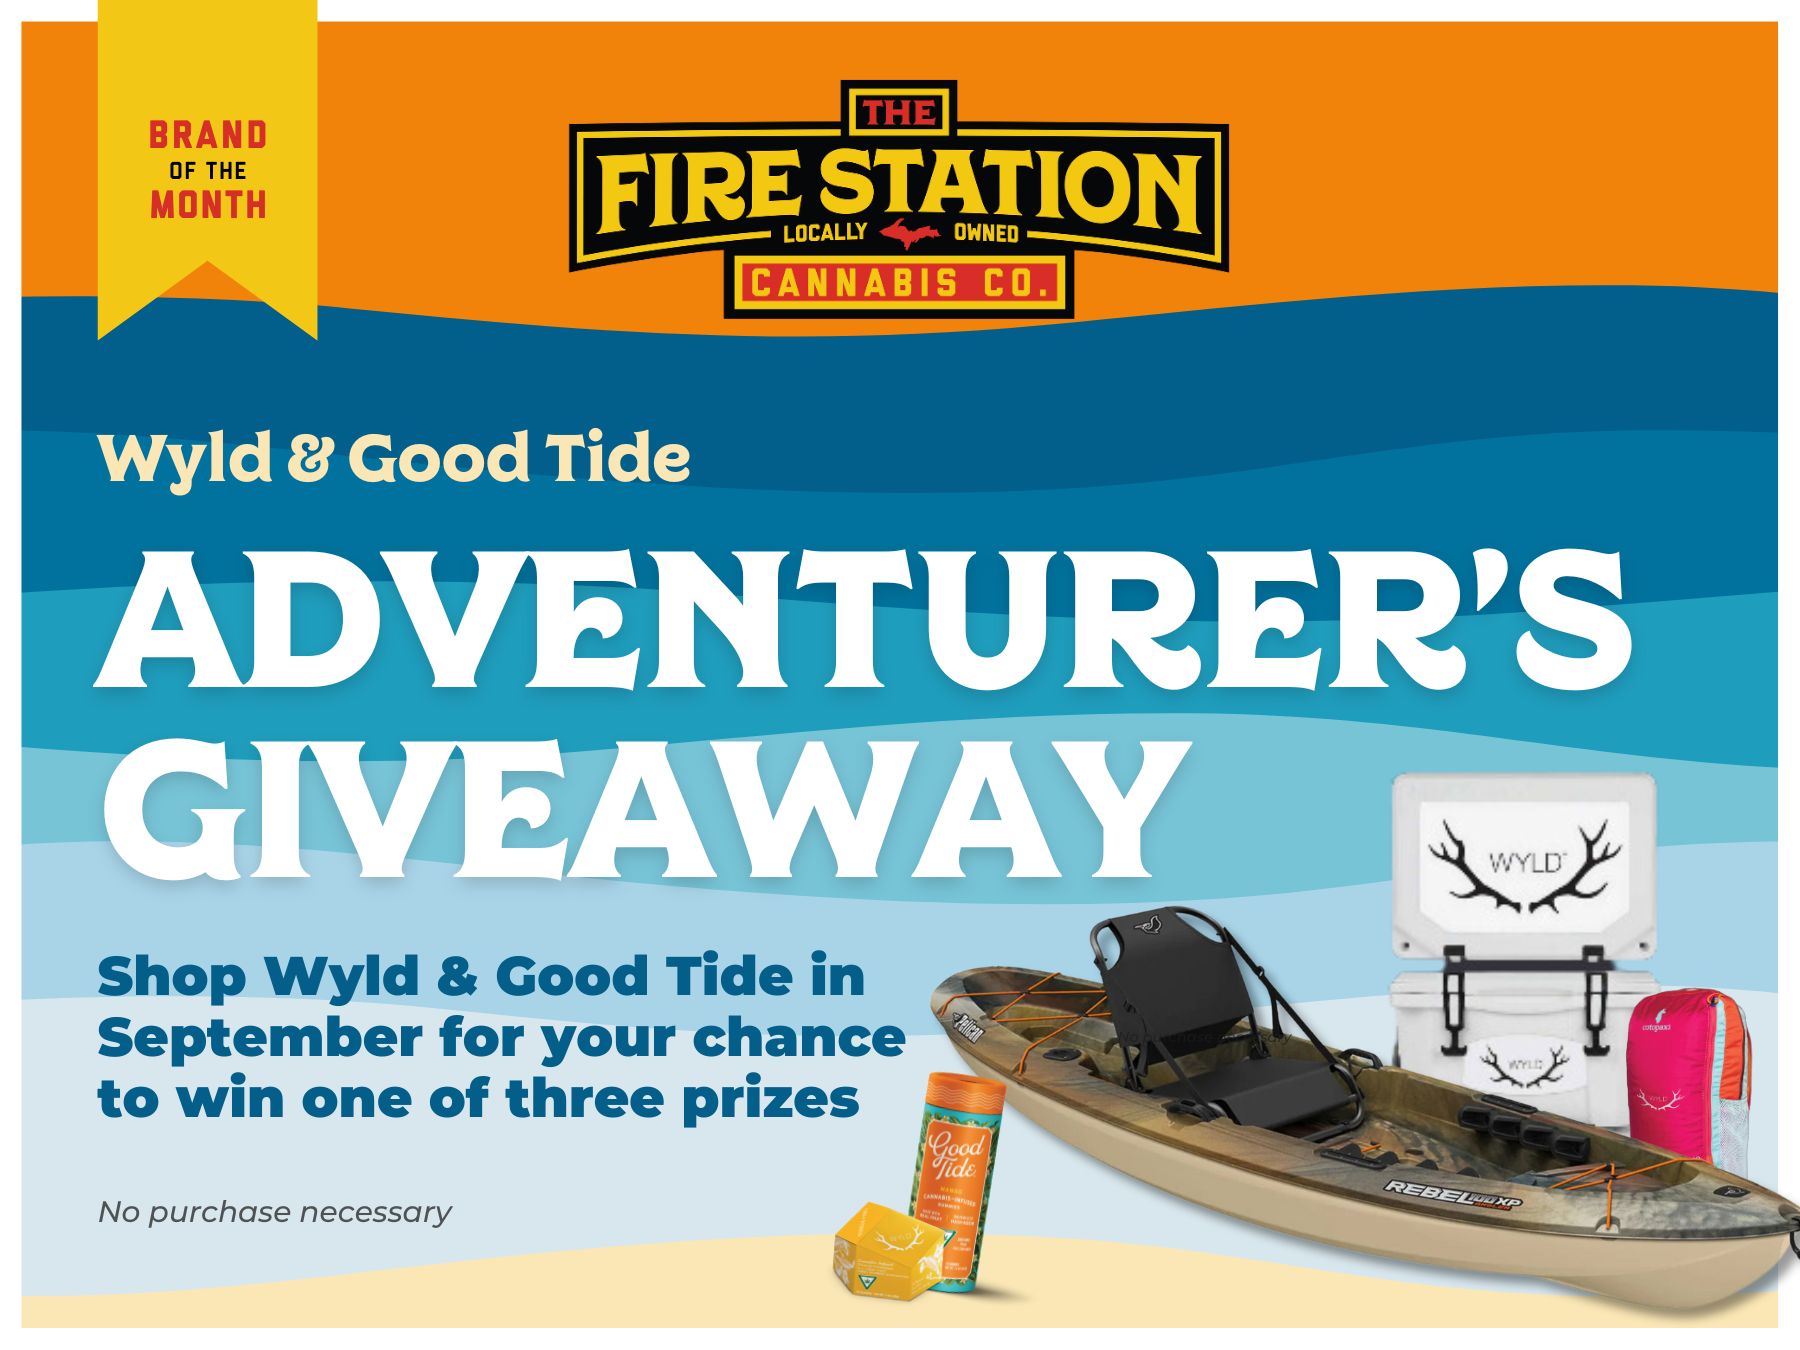 Brand of The Month – Wyld & Good Tide Adventurer’s Giveaway